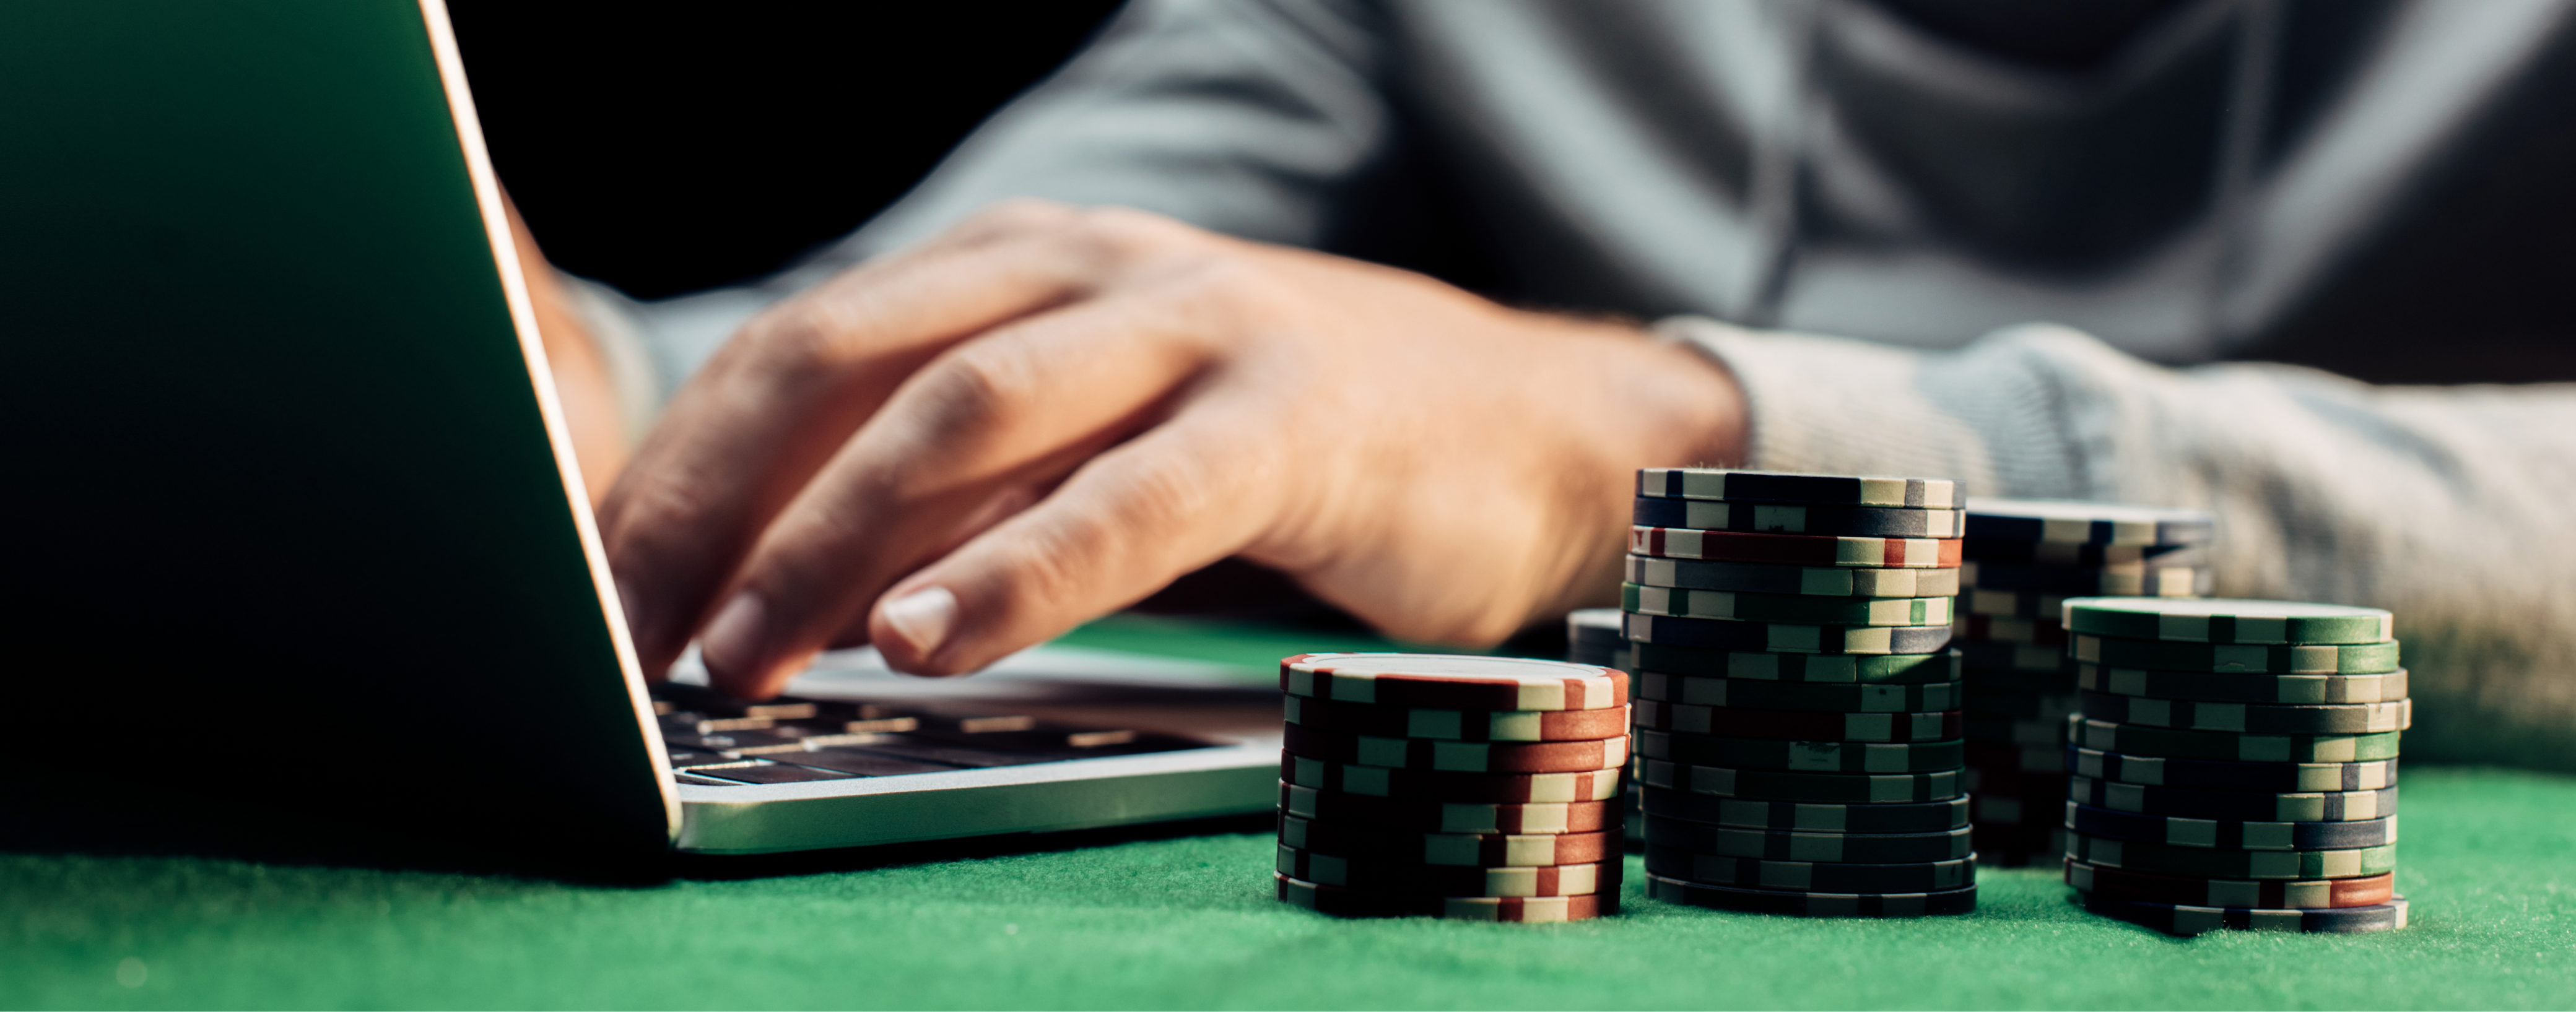 The Pros And Cons Of gambling